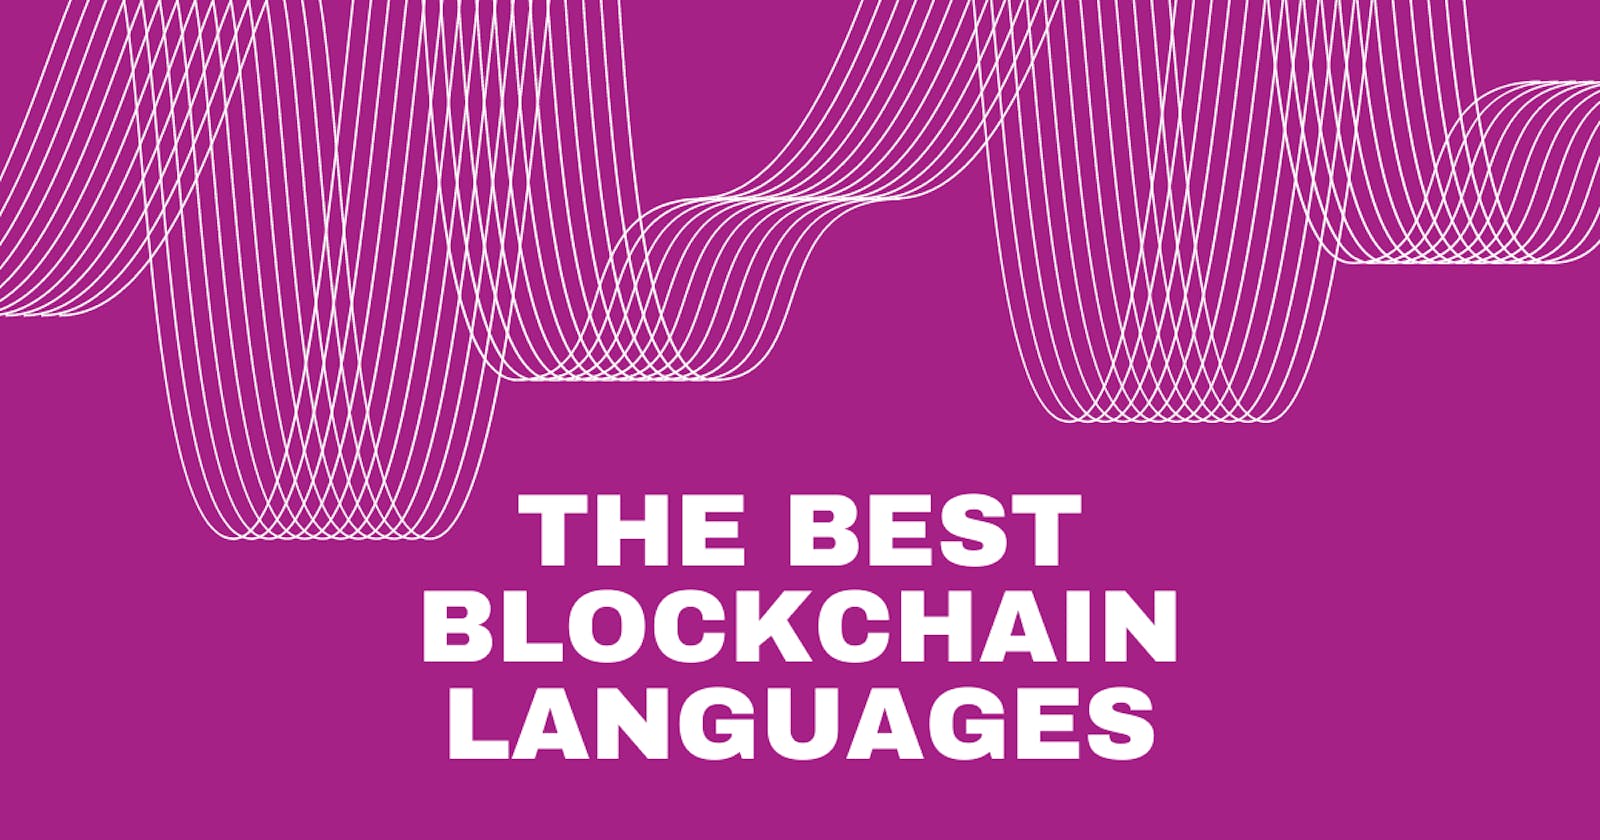 Move over Solidity, these are the REAL blockchain programming languages